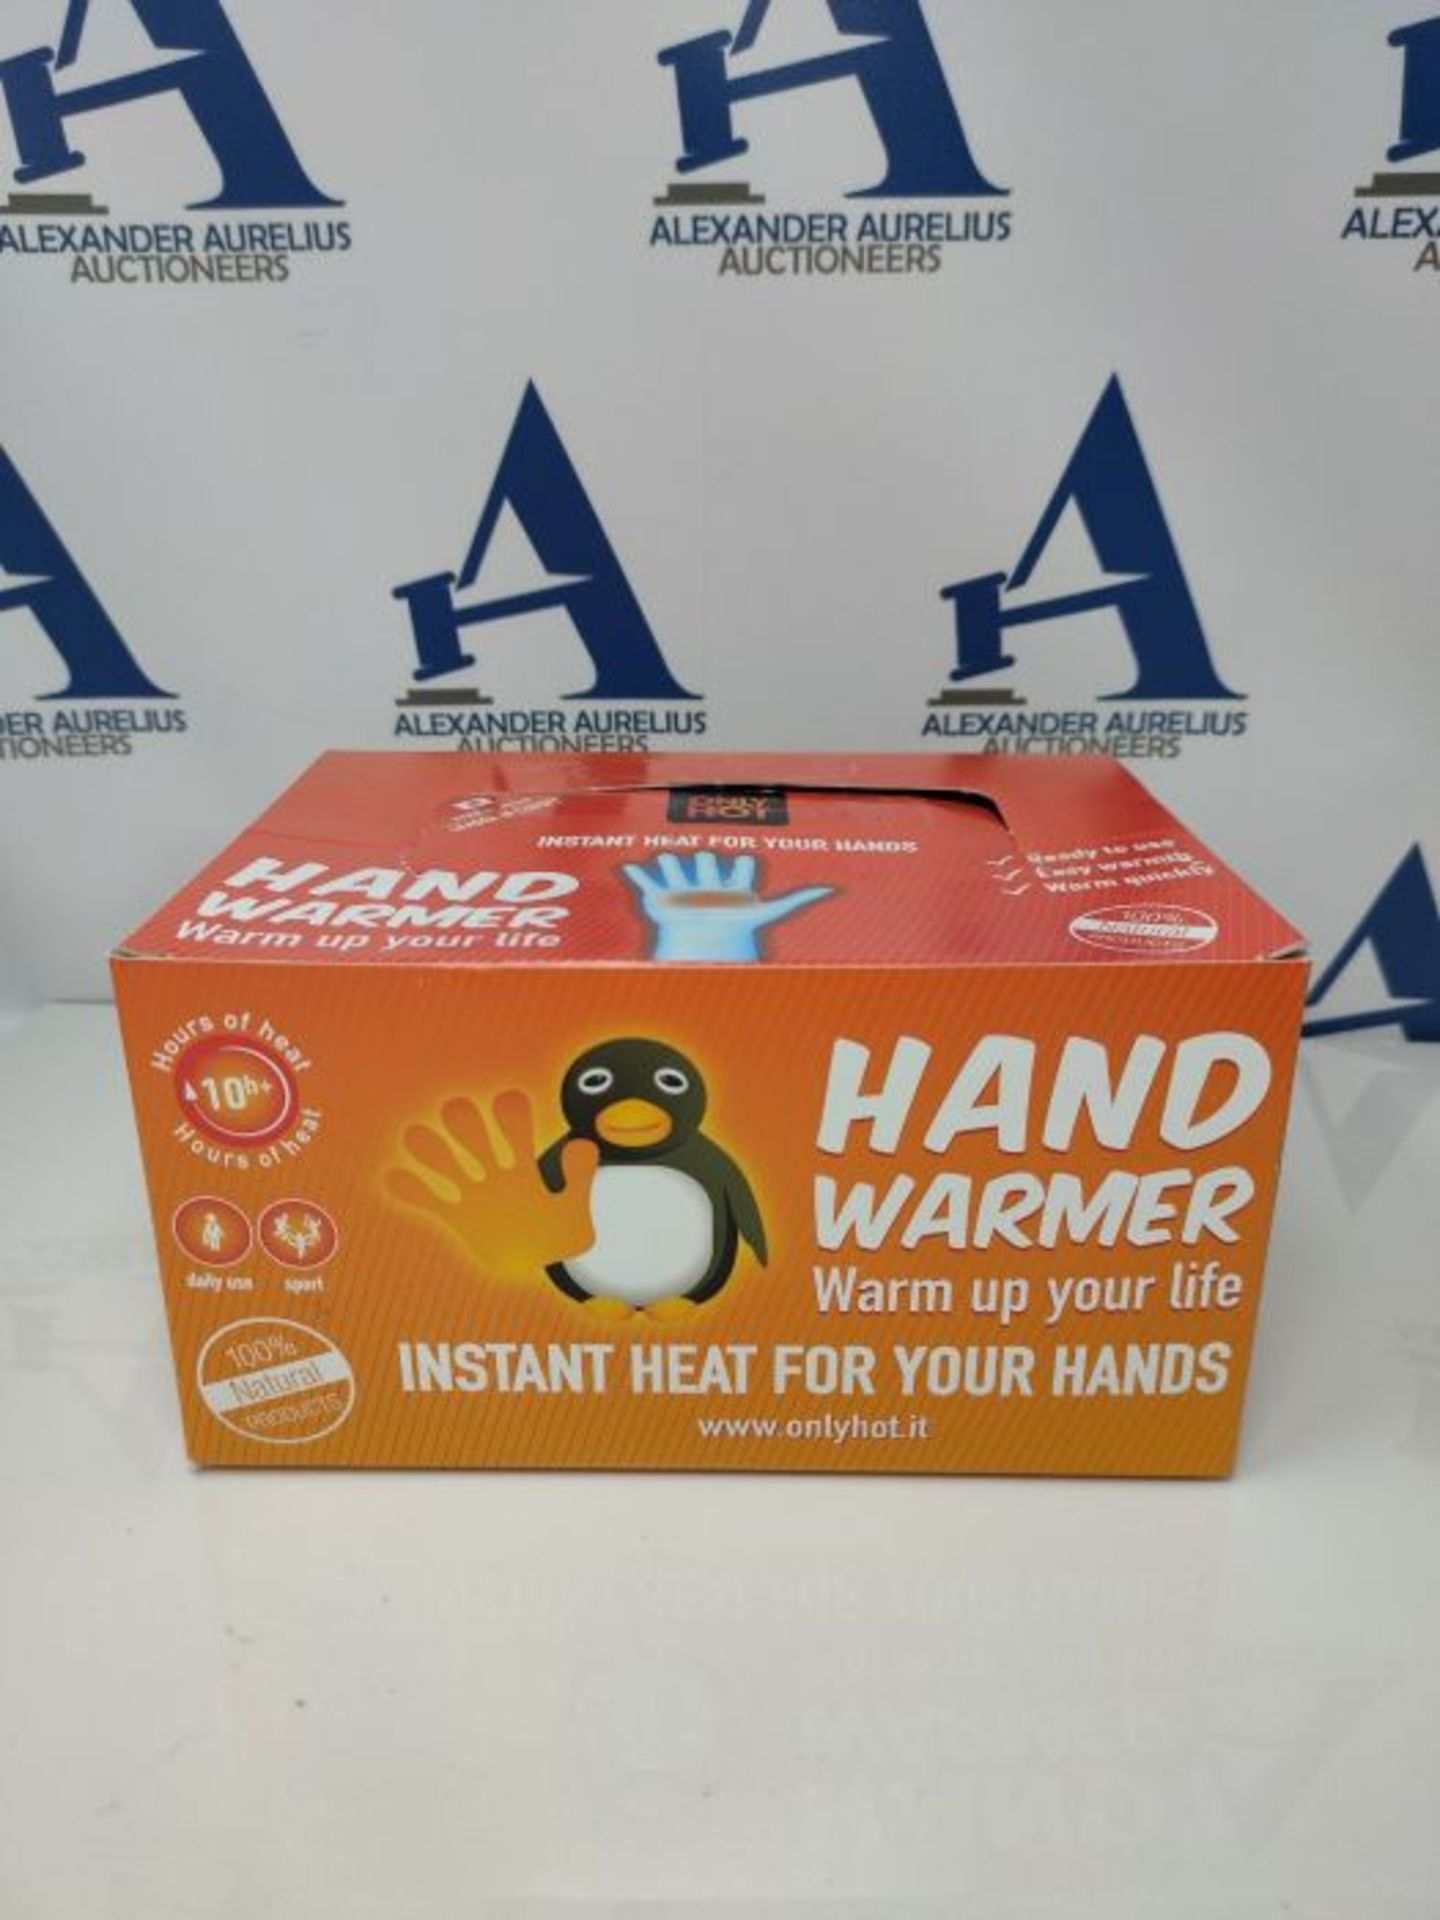 Hand Warmer Value Pack of 40 pairs(Pack of 2) by Only Hot - Image 2 of 3